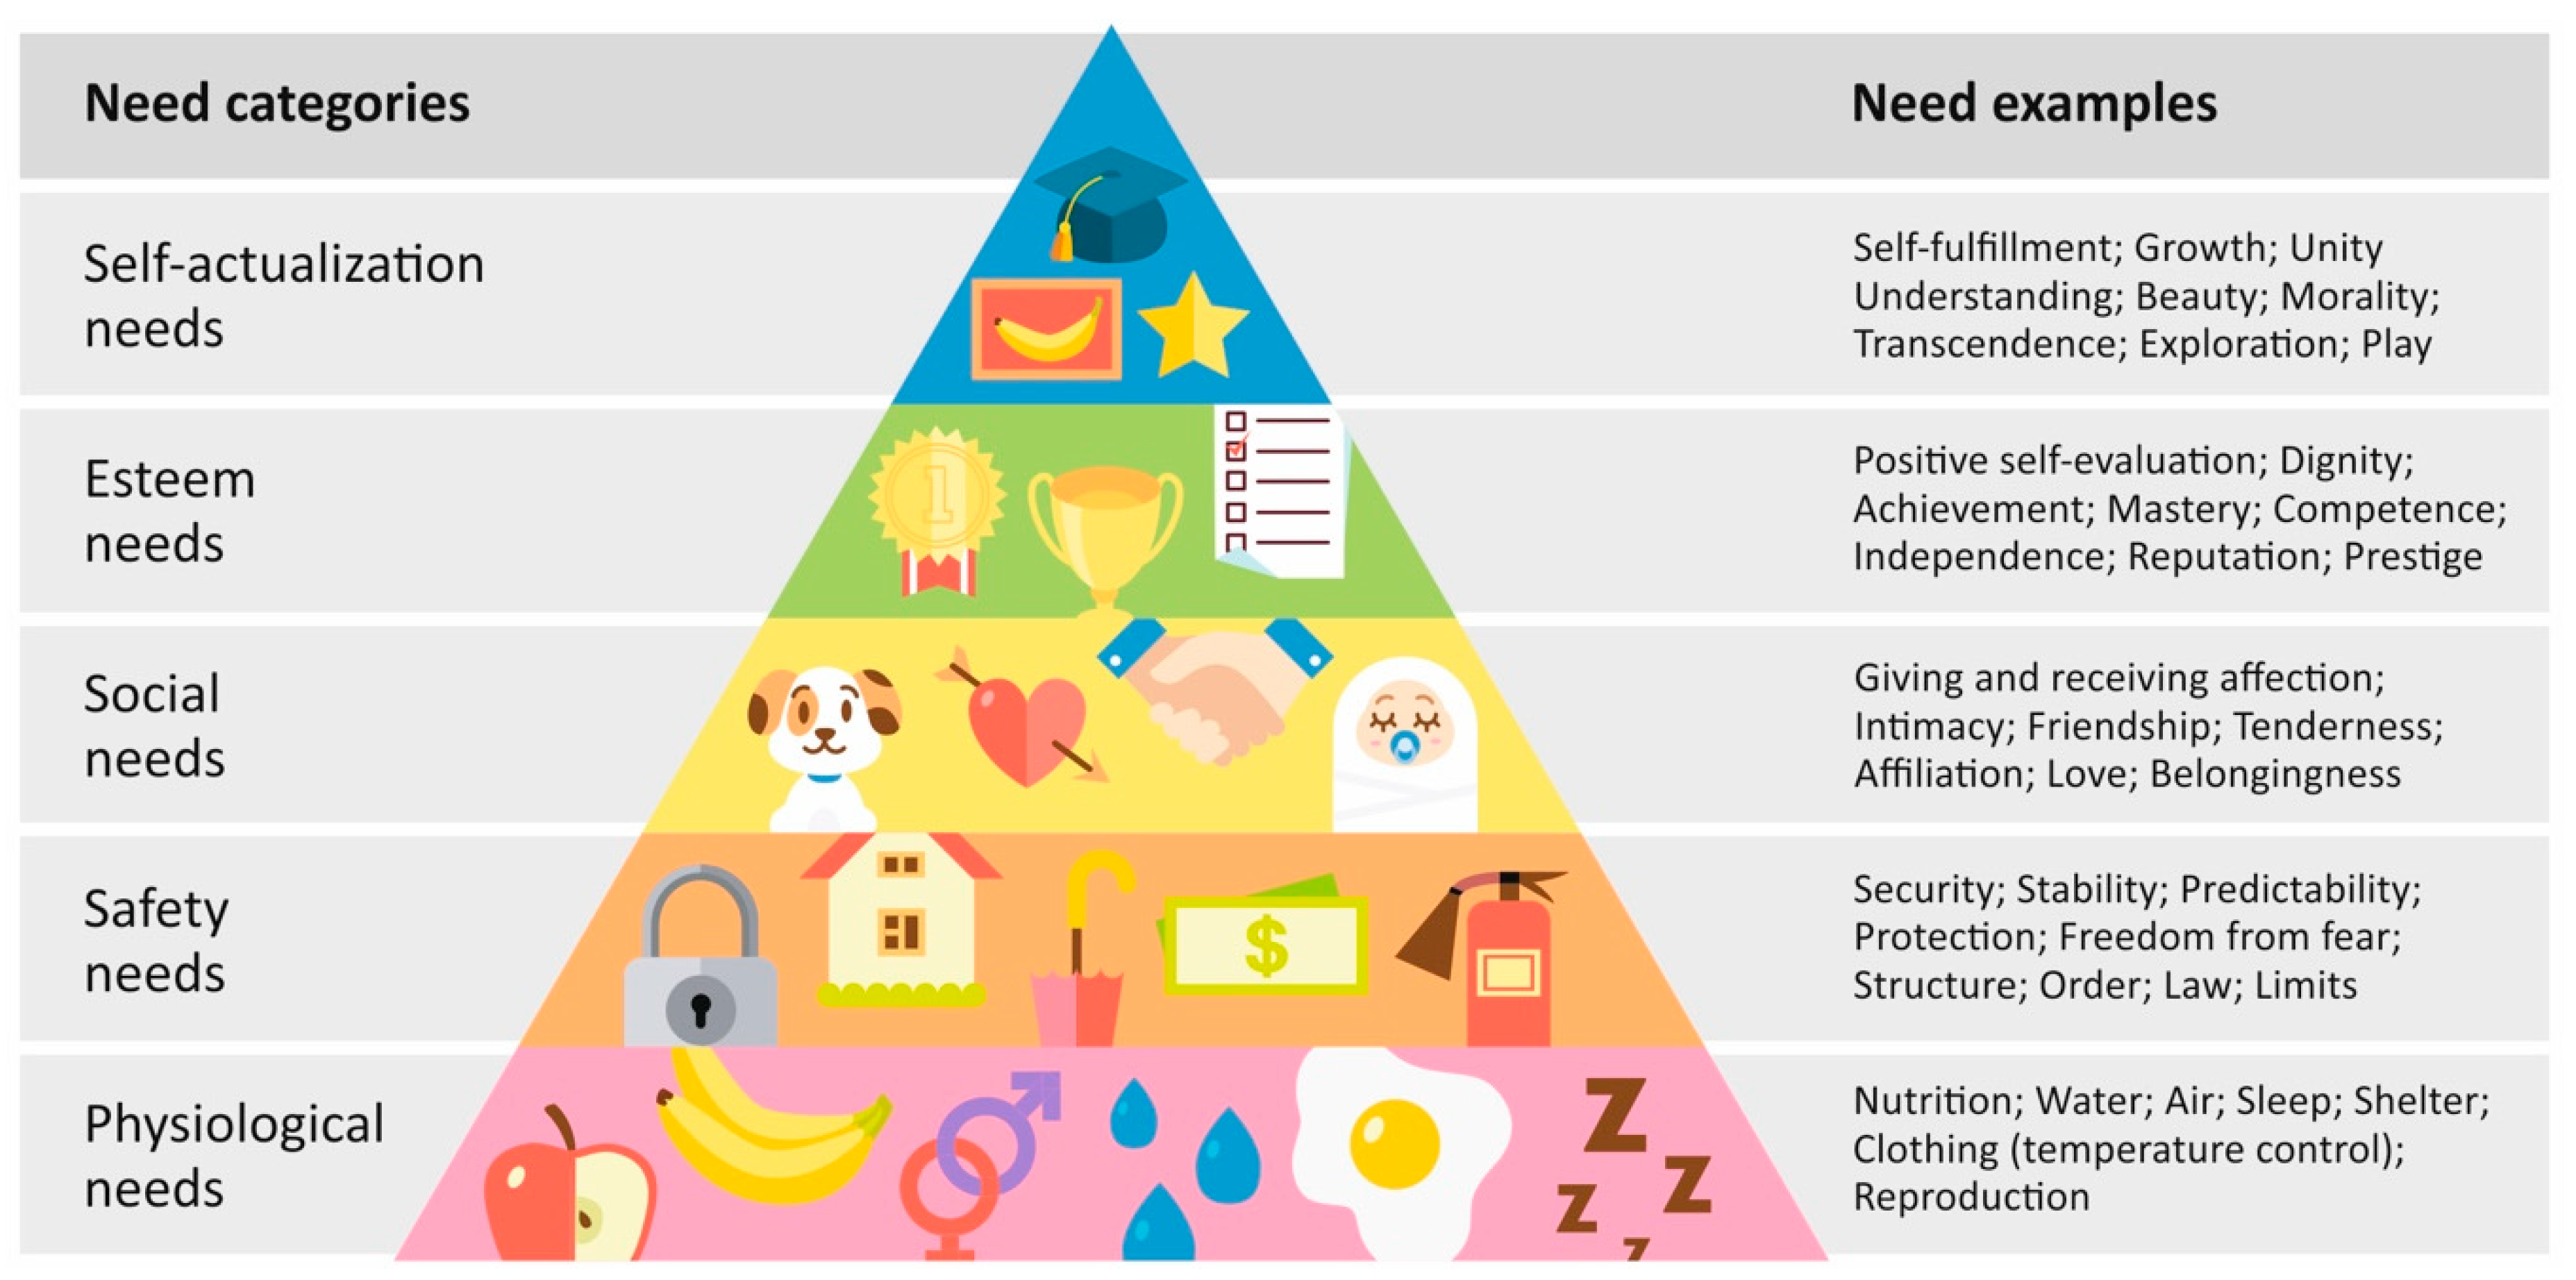 Business 149(Wed, Thur, Sat, Sun, Tue) – Maslow’s Hierarchy Of Needs In